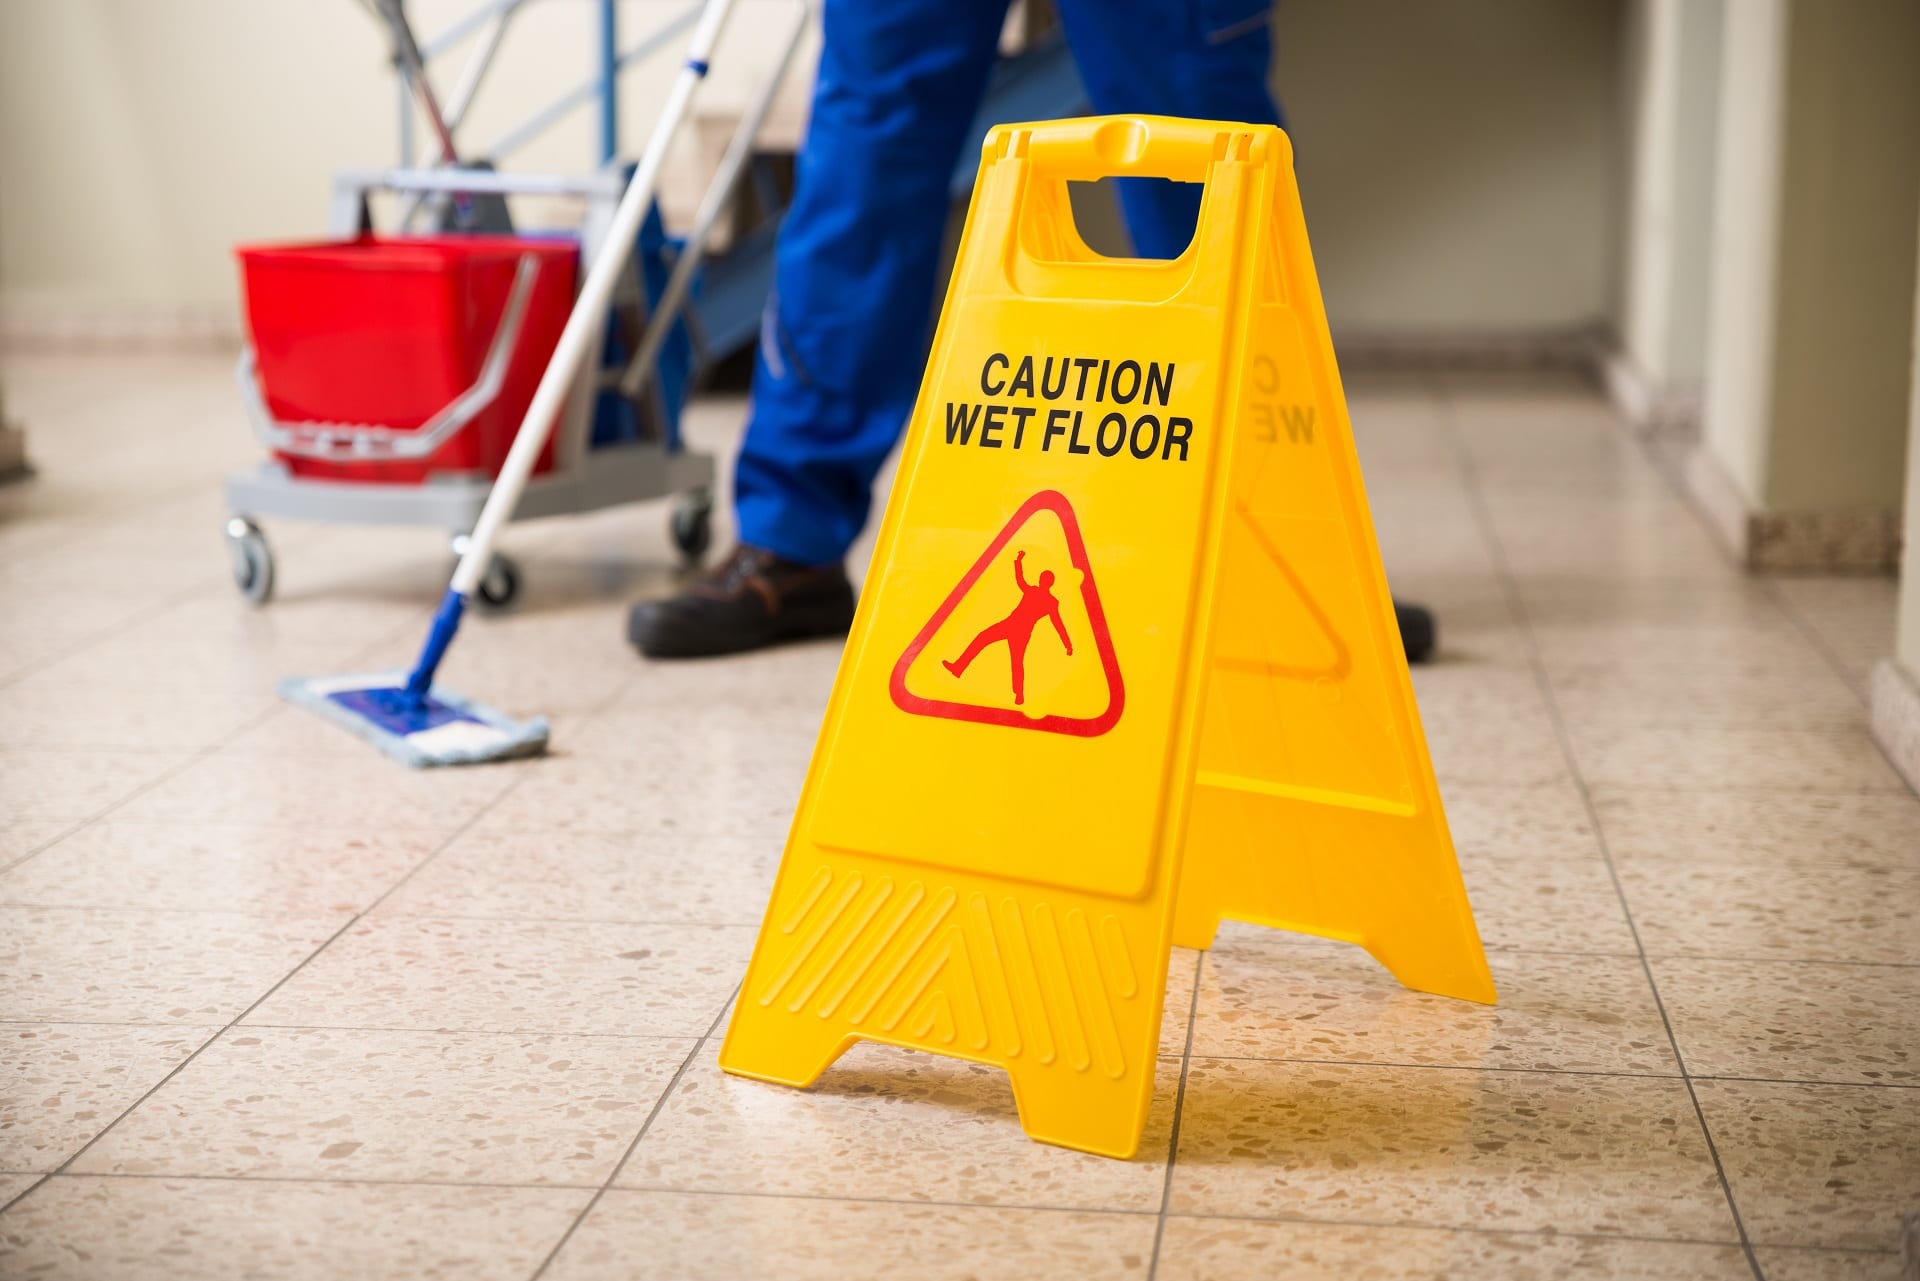 Worker mops with wet floor caution sign | premises liability attorney nyc | Gash & Associates, P.C.